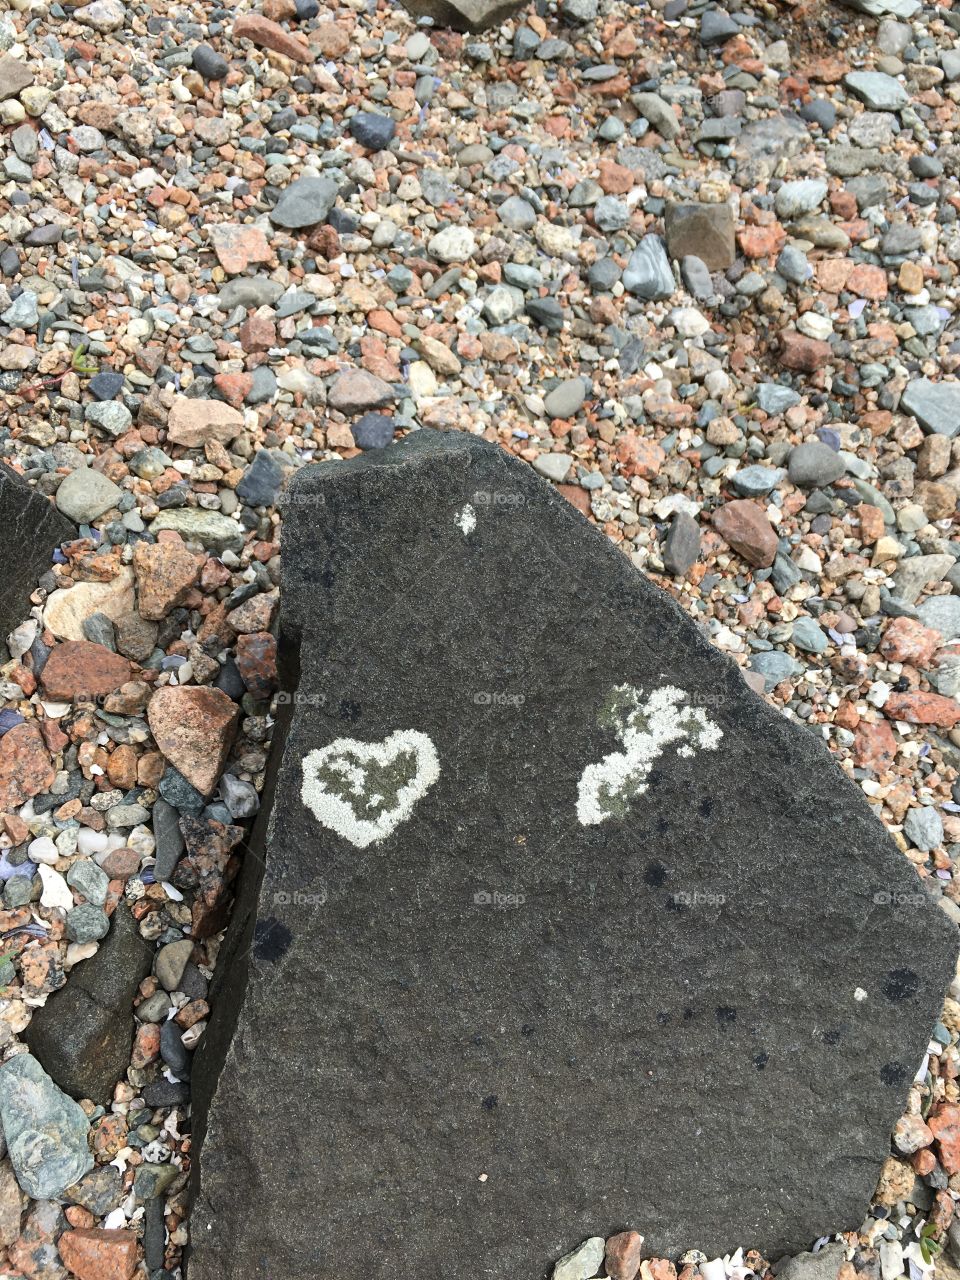 Natural heart on a rock